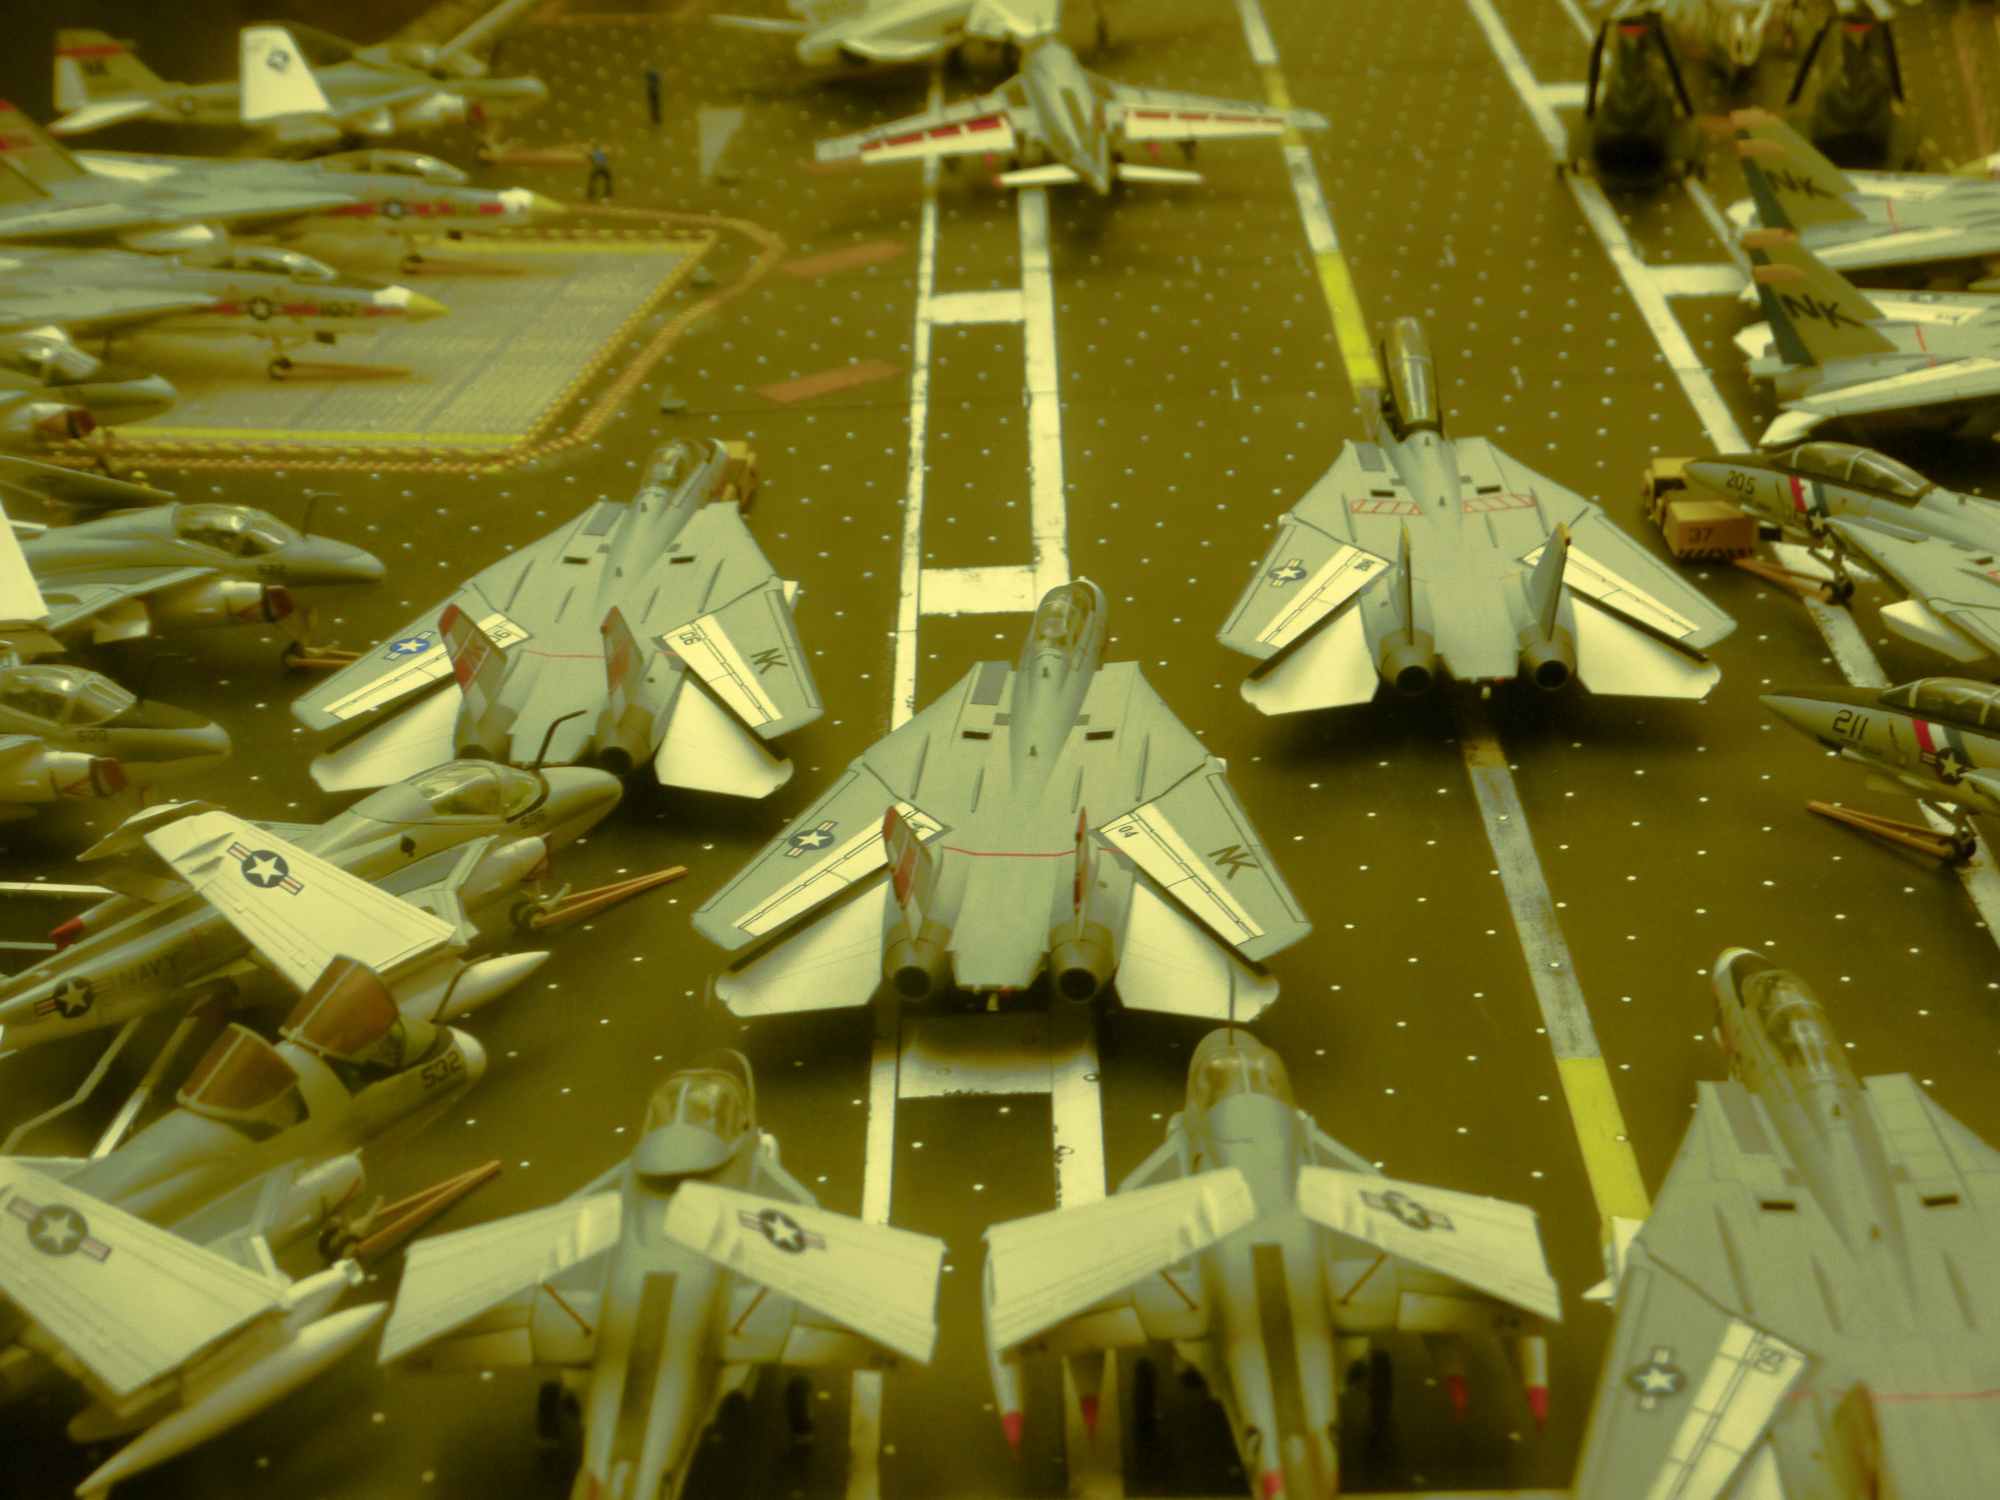 Model F-14 fighters